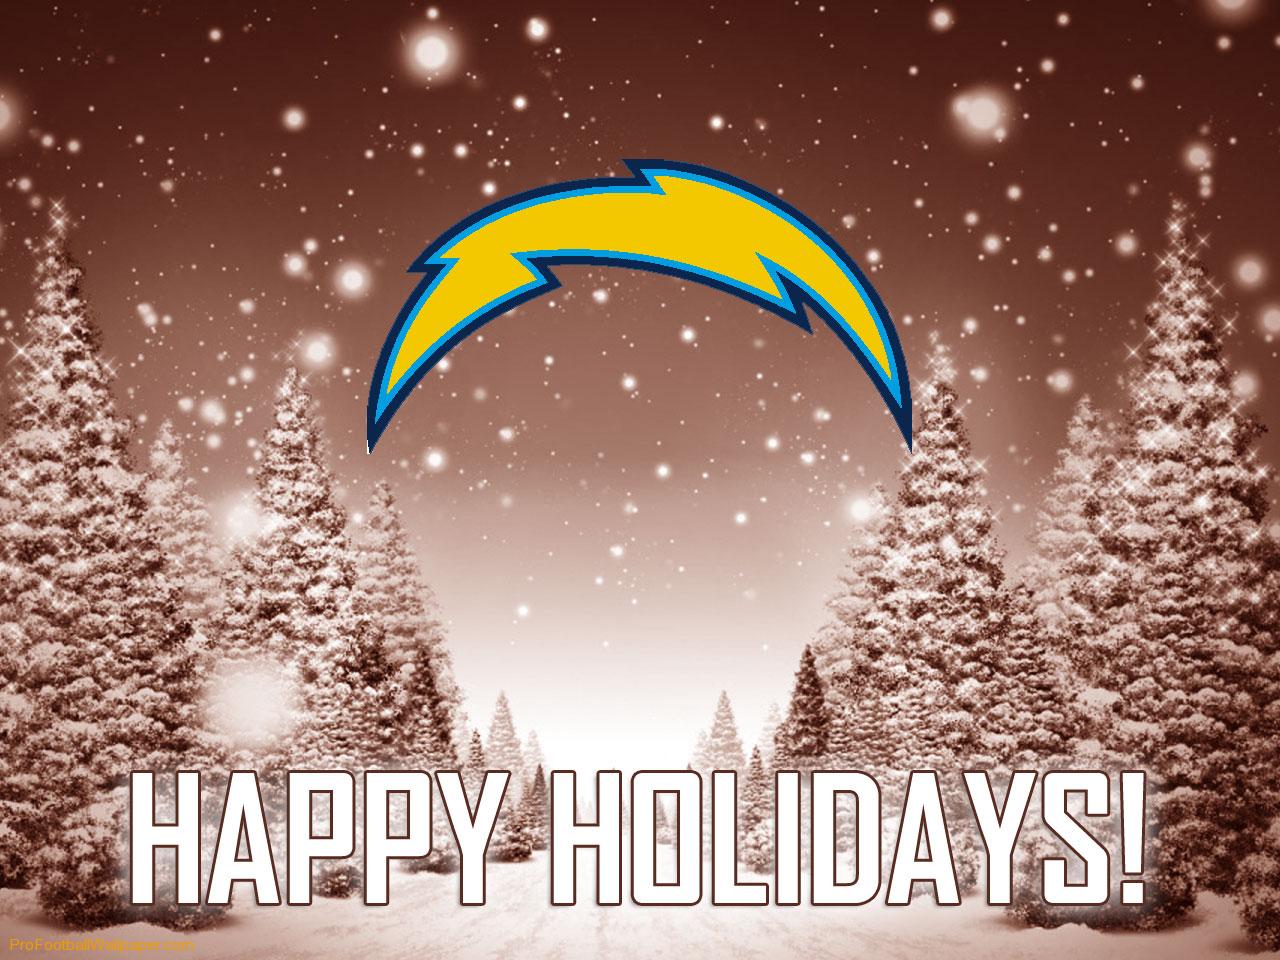 San Diego Chargers Holidays Wallpaper 177724 HD Wallpaper Res